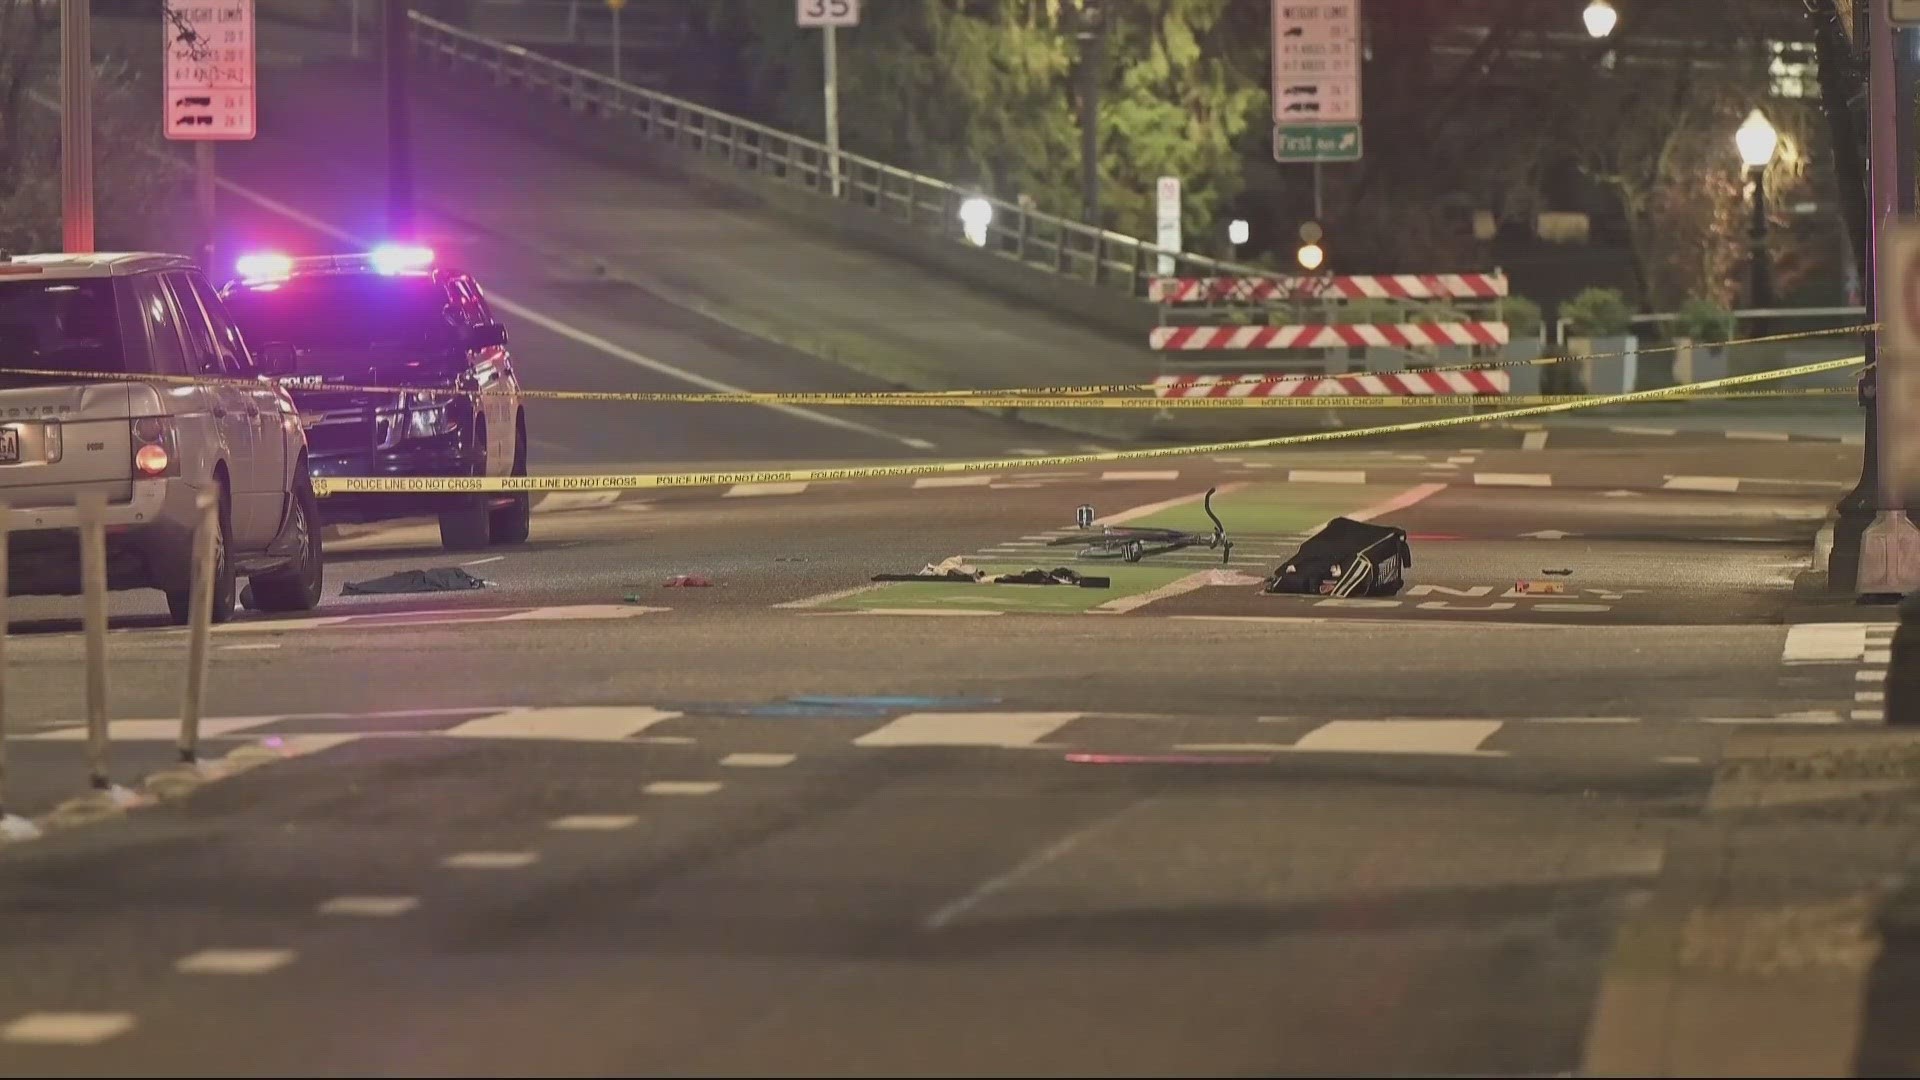 A bicyclist hit by a vehicle while running a red light in early March died Monday from his injuries, police said.